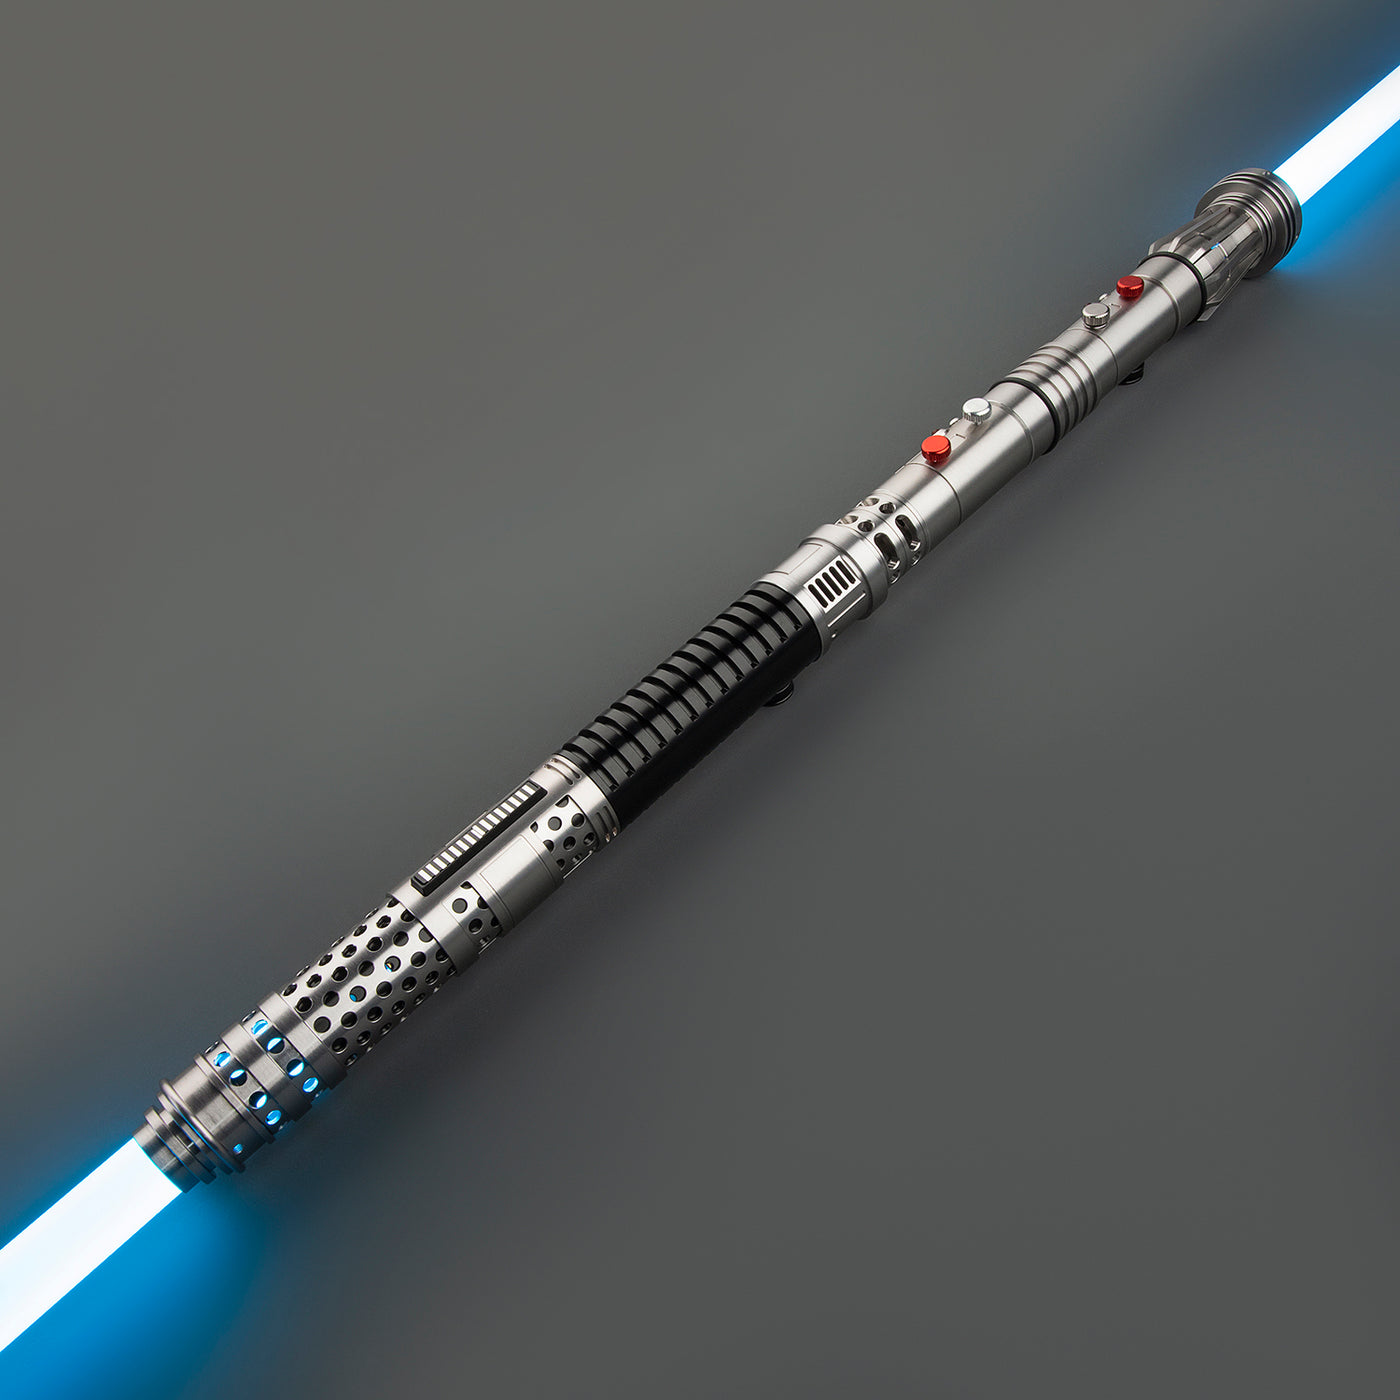 Maul Pro Double Bladed Inspired